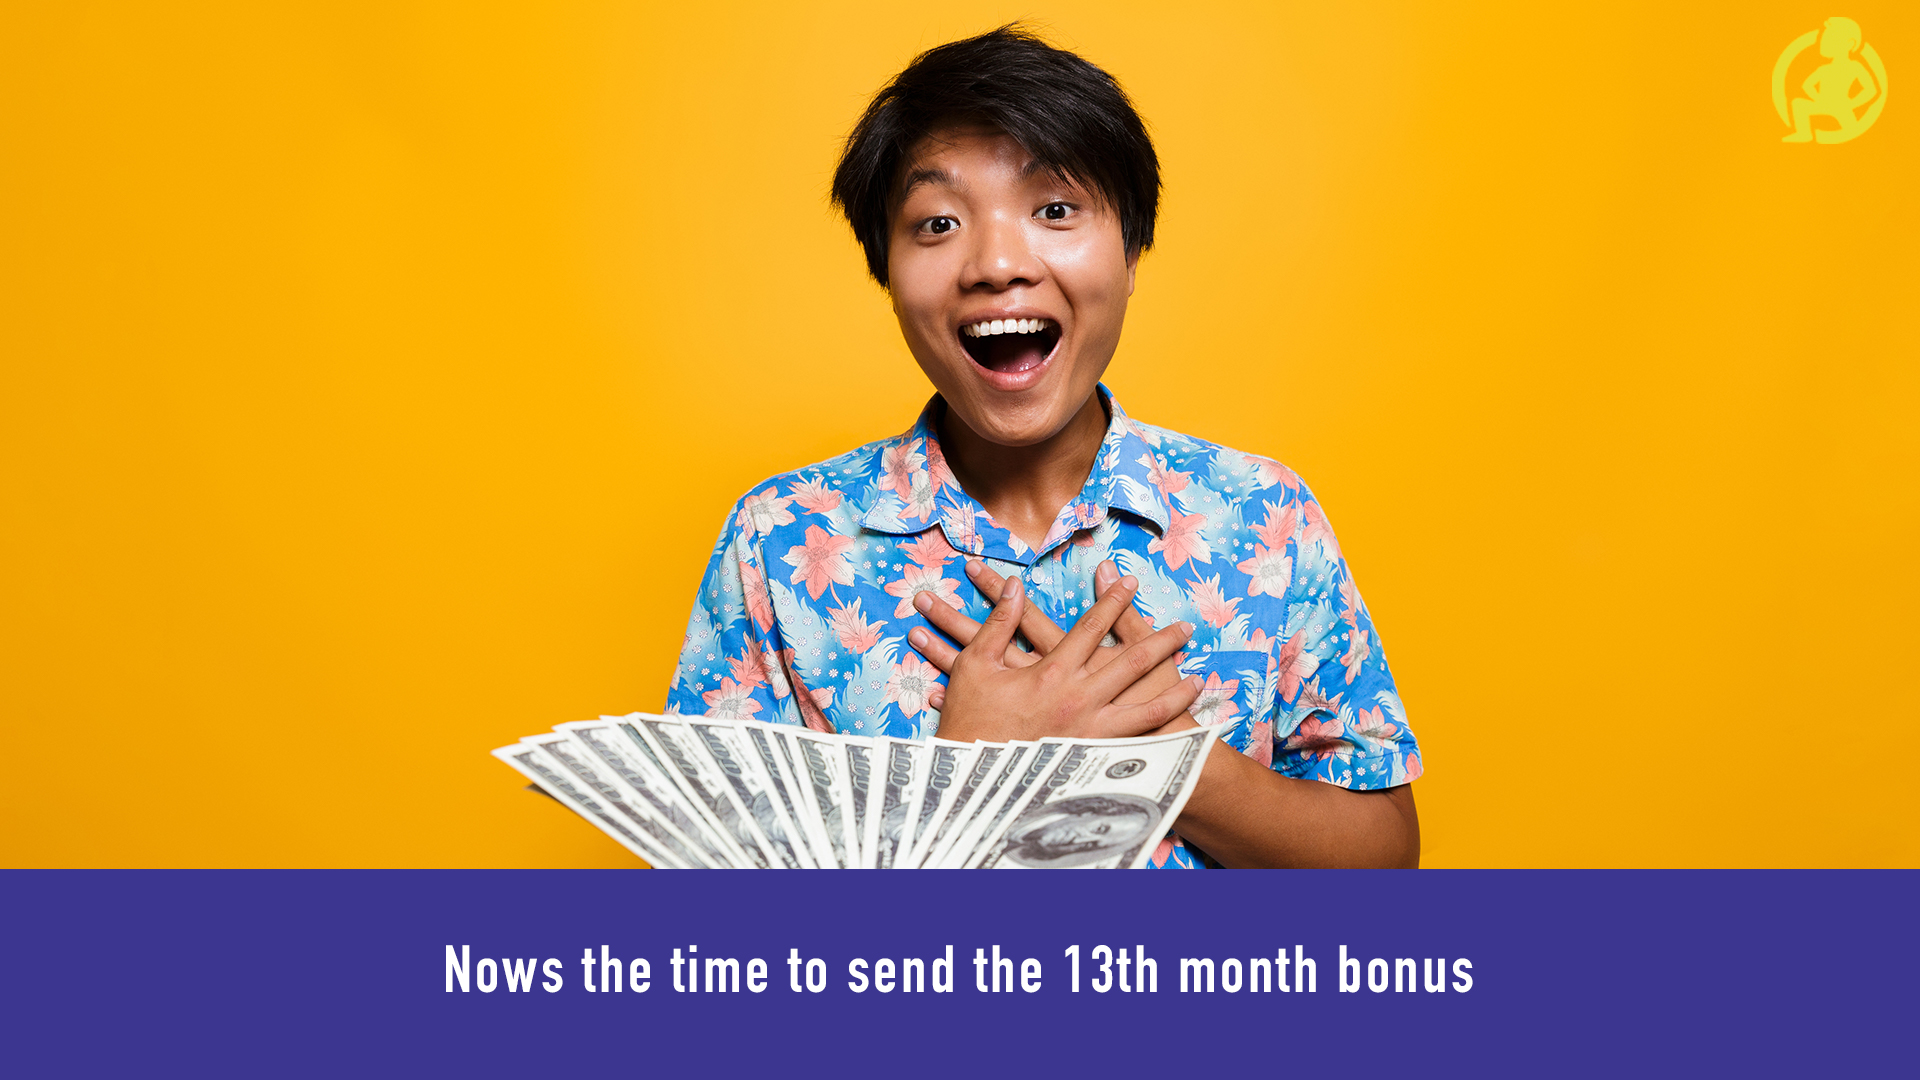 736 Nows the time to send the 13th month bonus